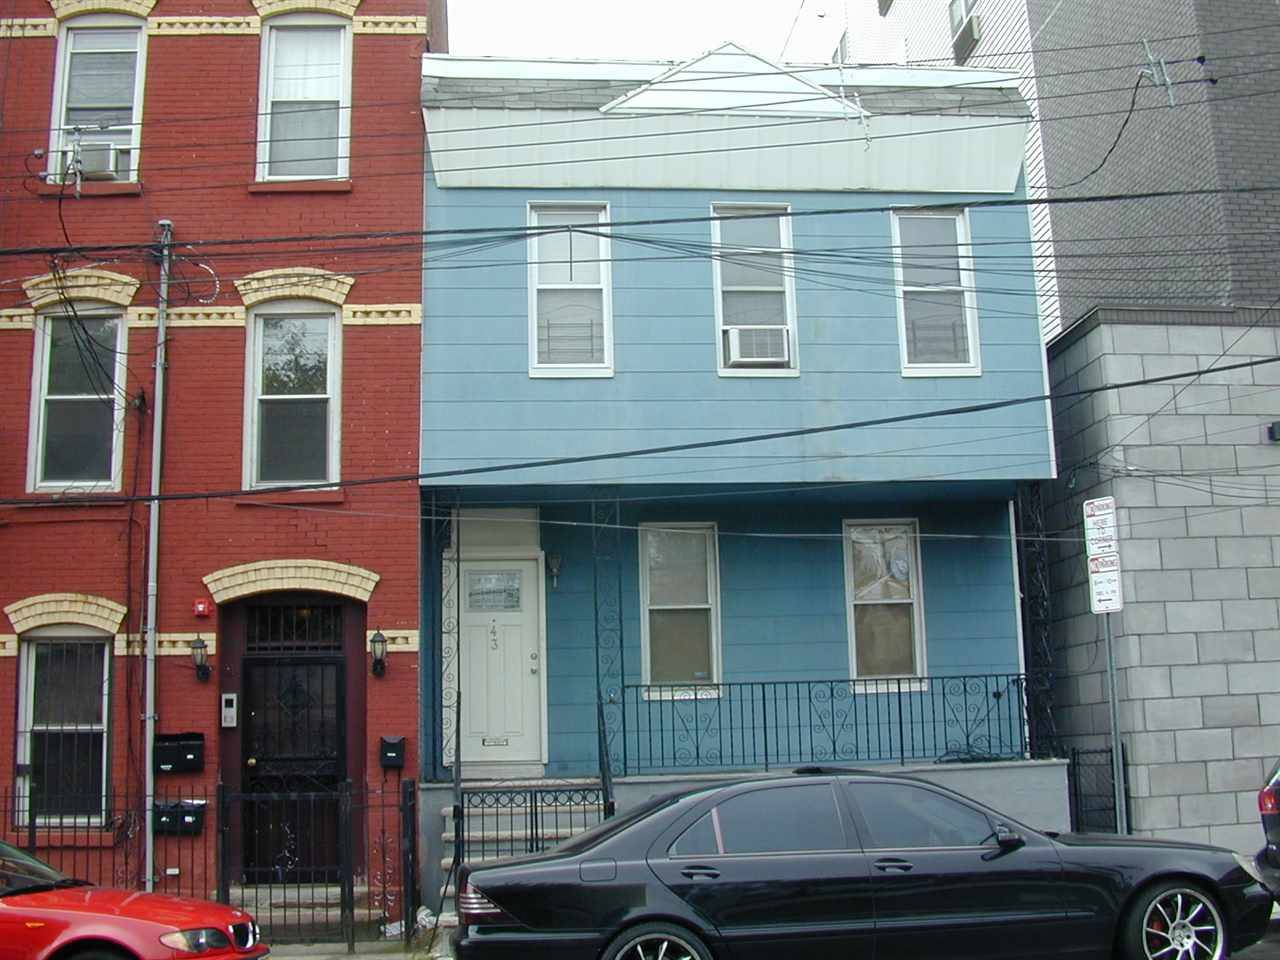 A strategically located 2 family house and just 3 minutes away from Jersey City downtown